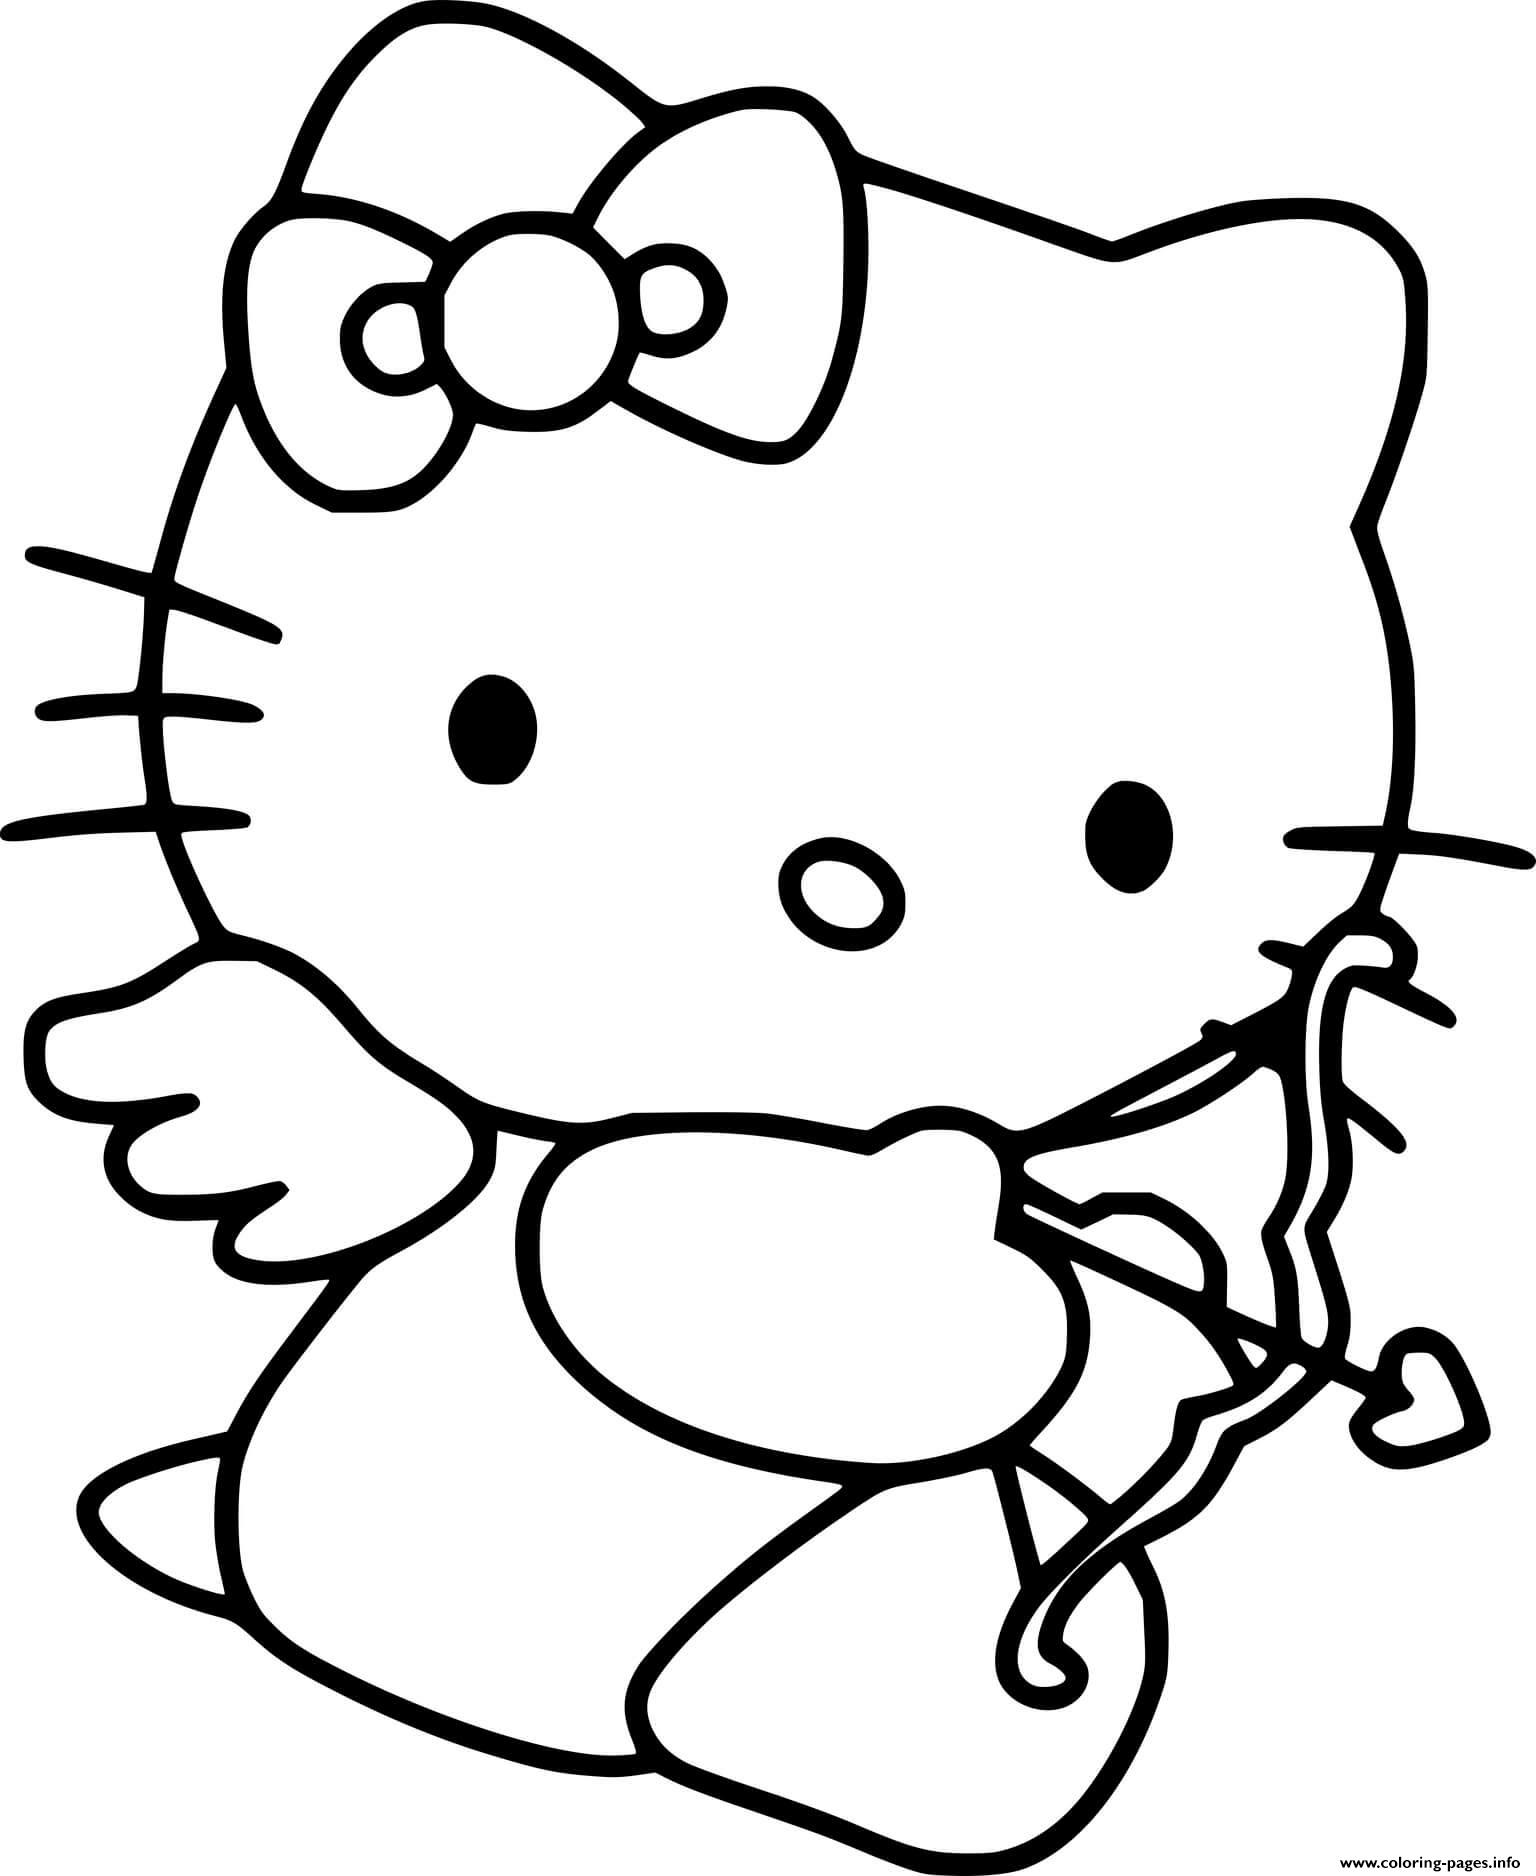 Cupid Hello Kitty coloring